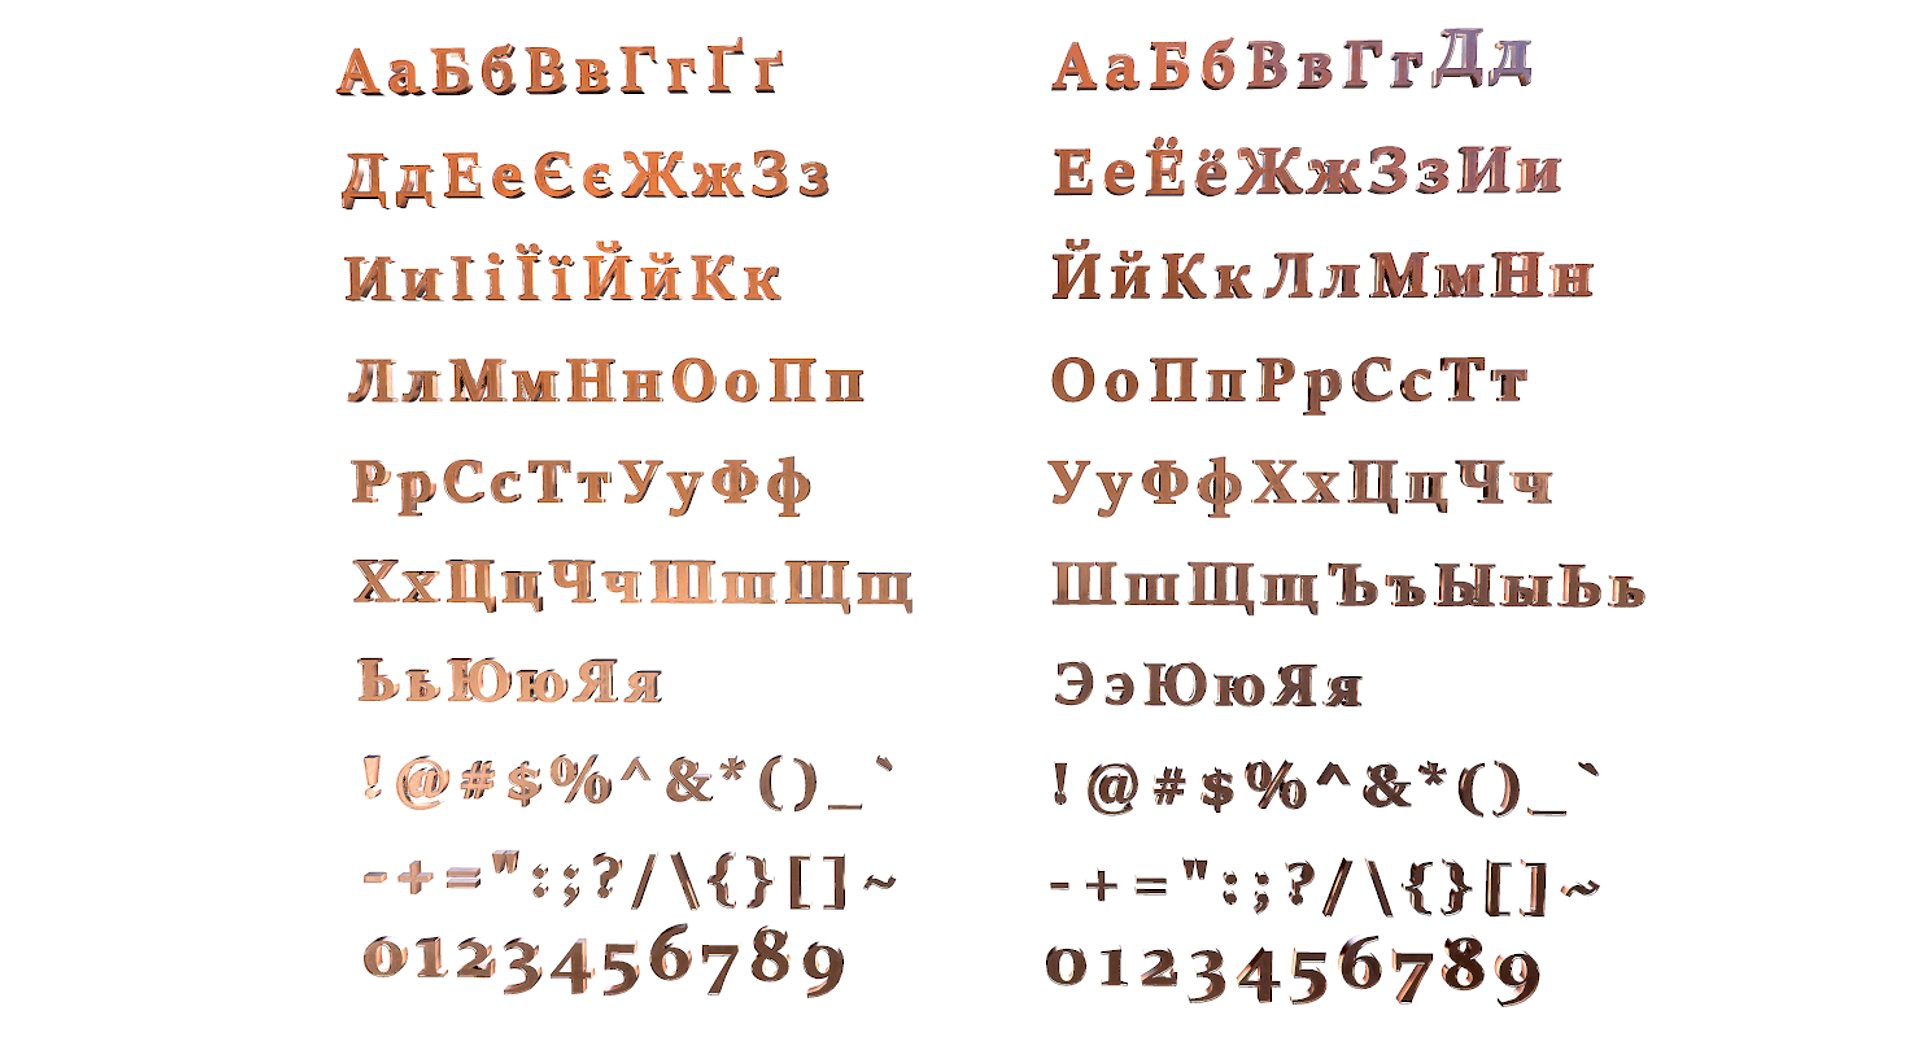 Russian and Ukrainian Letters - Copper